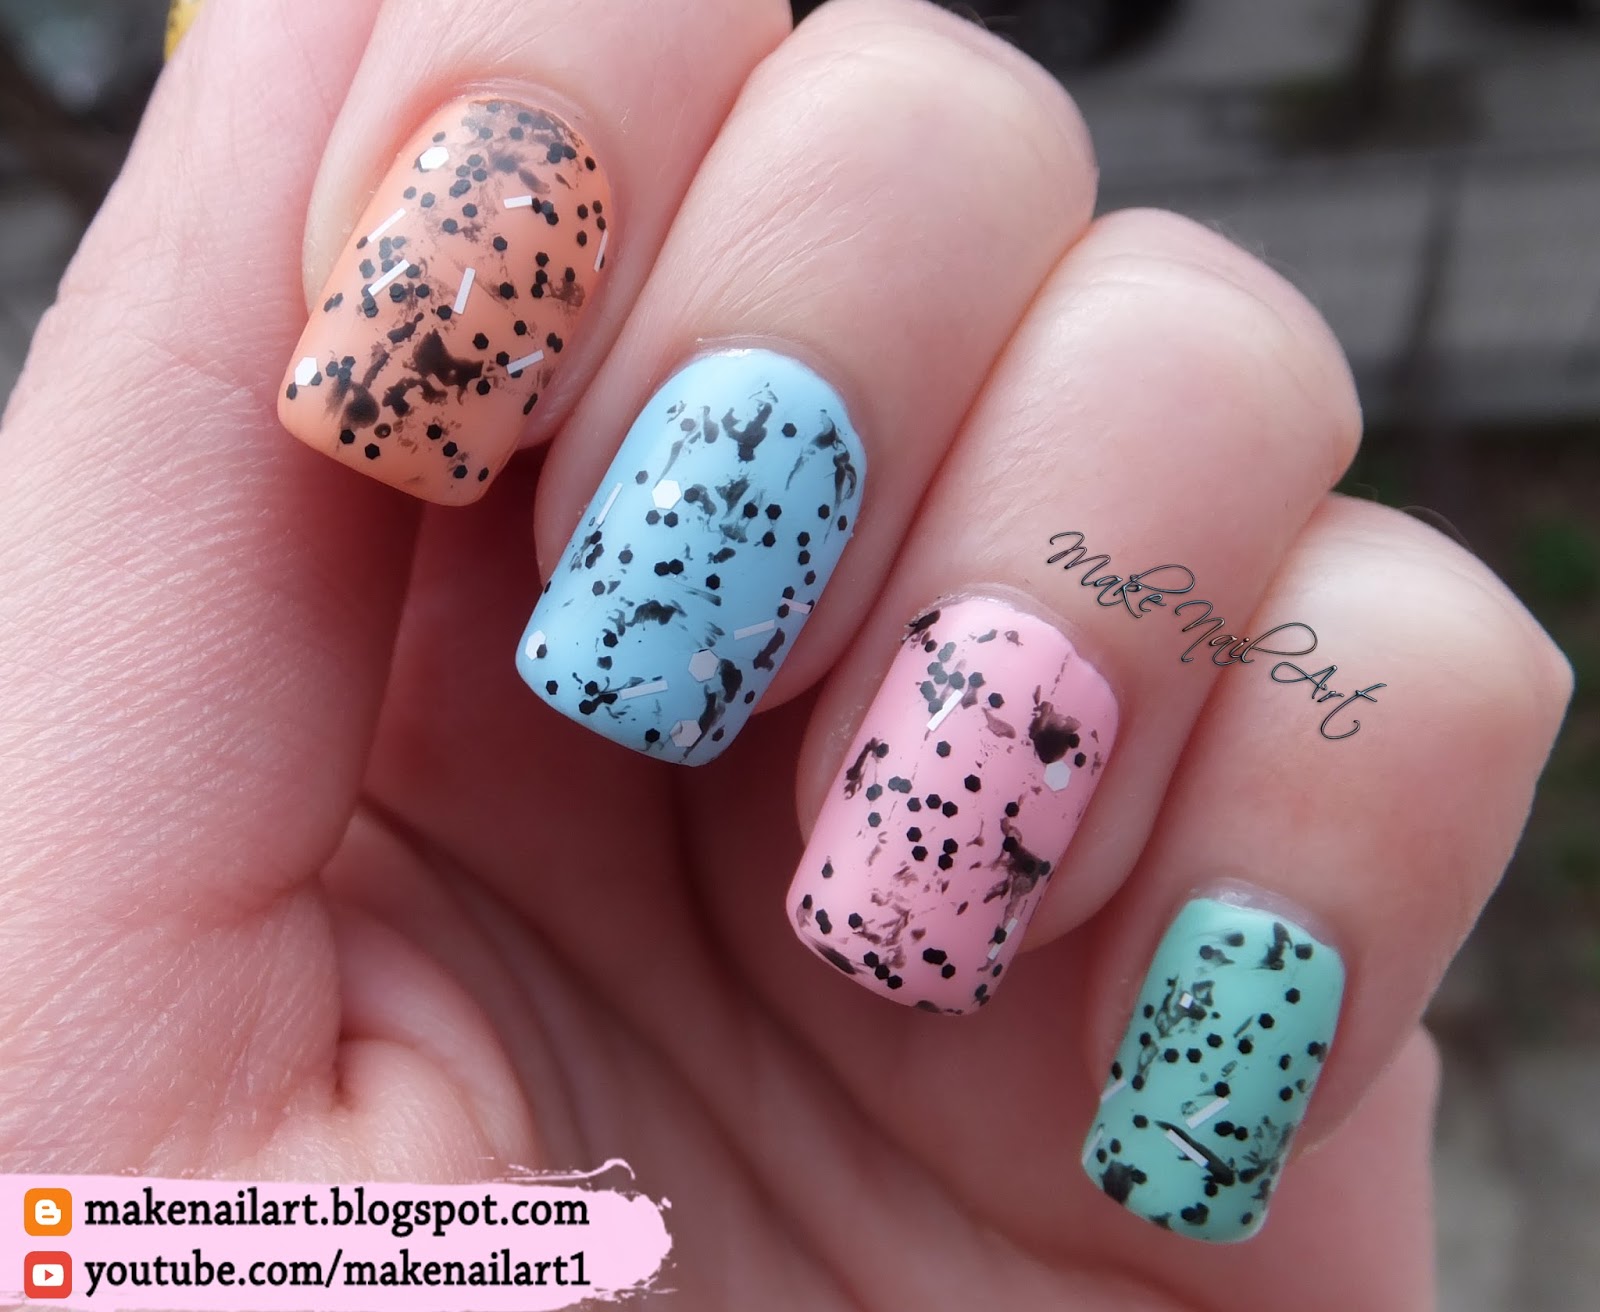 3. "You're Such a Pudapest: Nail Art Tutorial" - wide 6